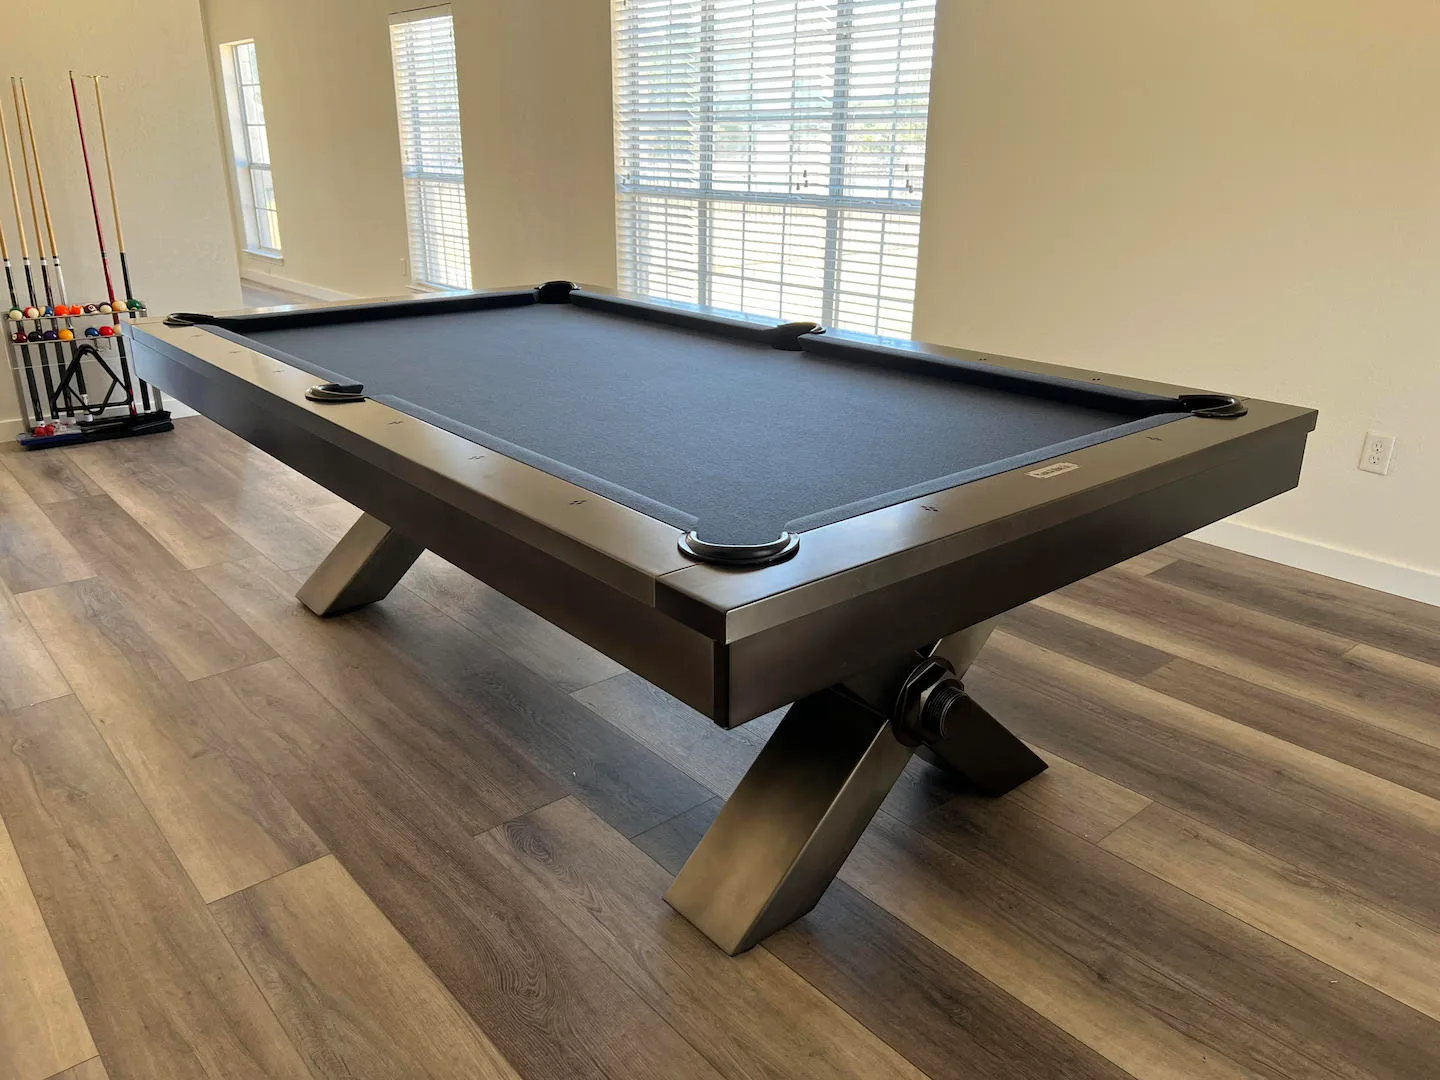 The Vox pool table with a metal frame and titanium Championship felt installed in a home by Trooper Billiards.